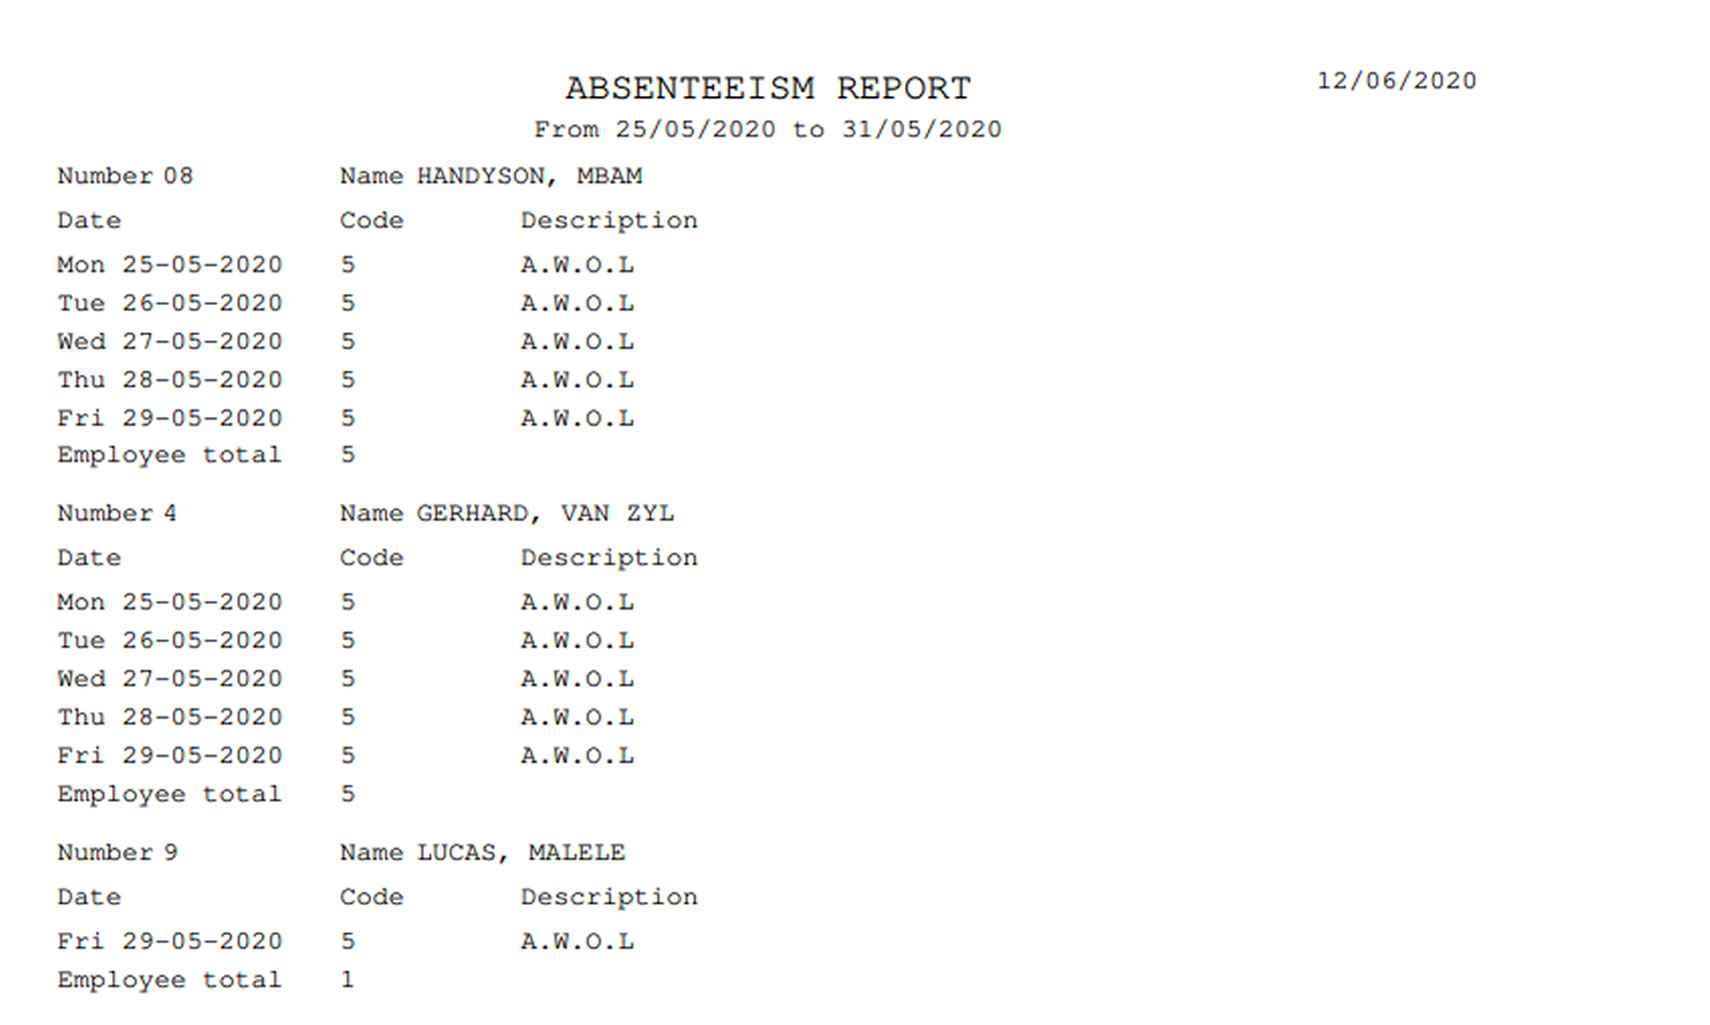 Time and attendance absentee report